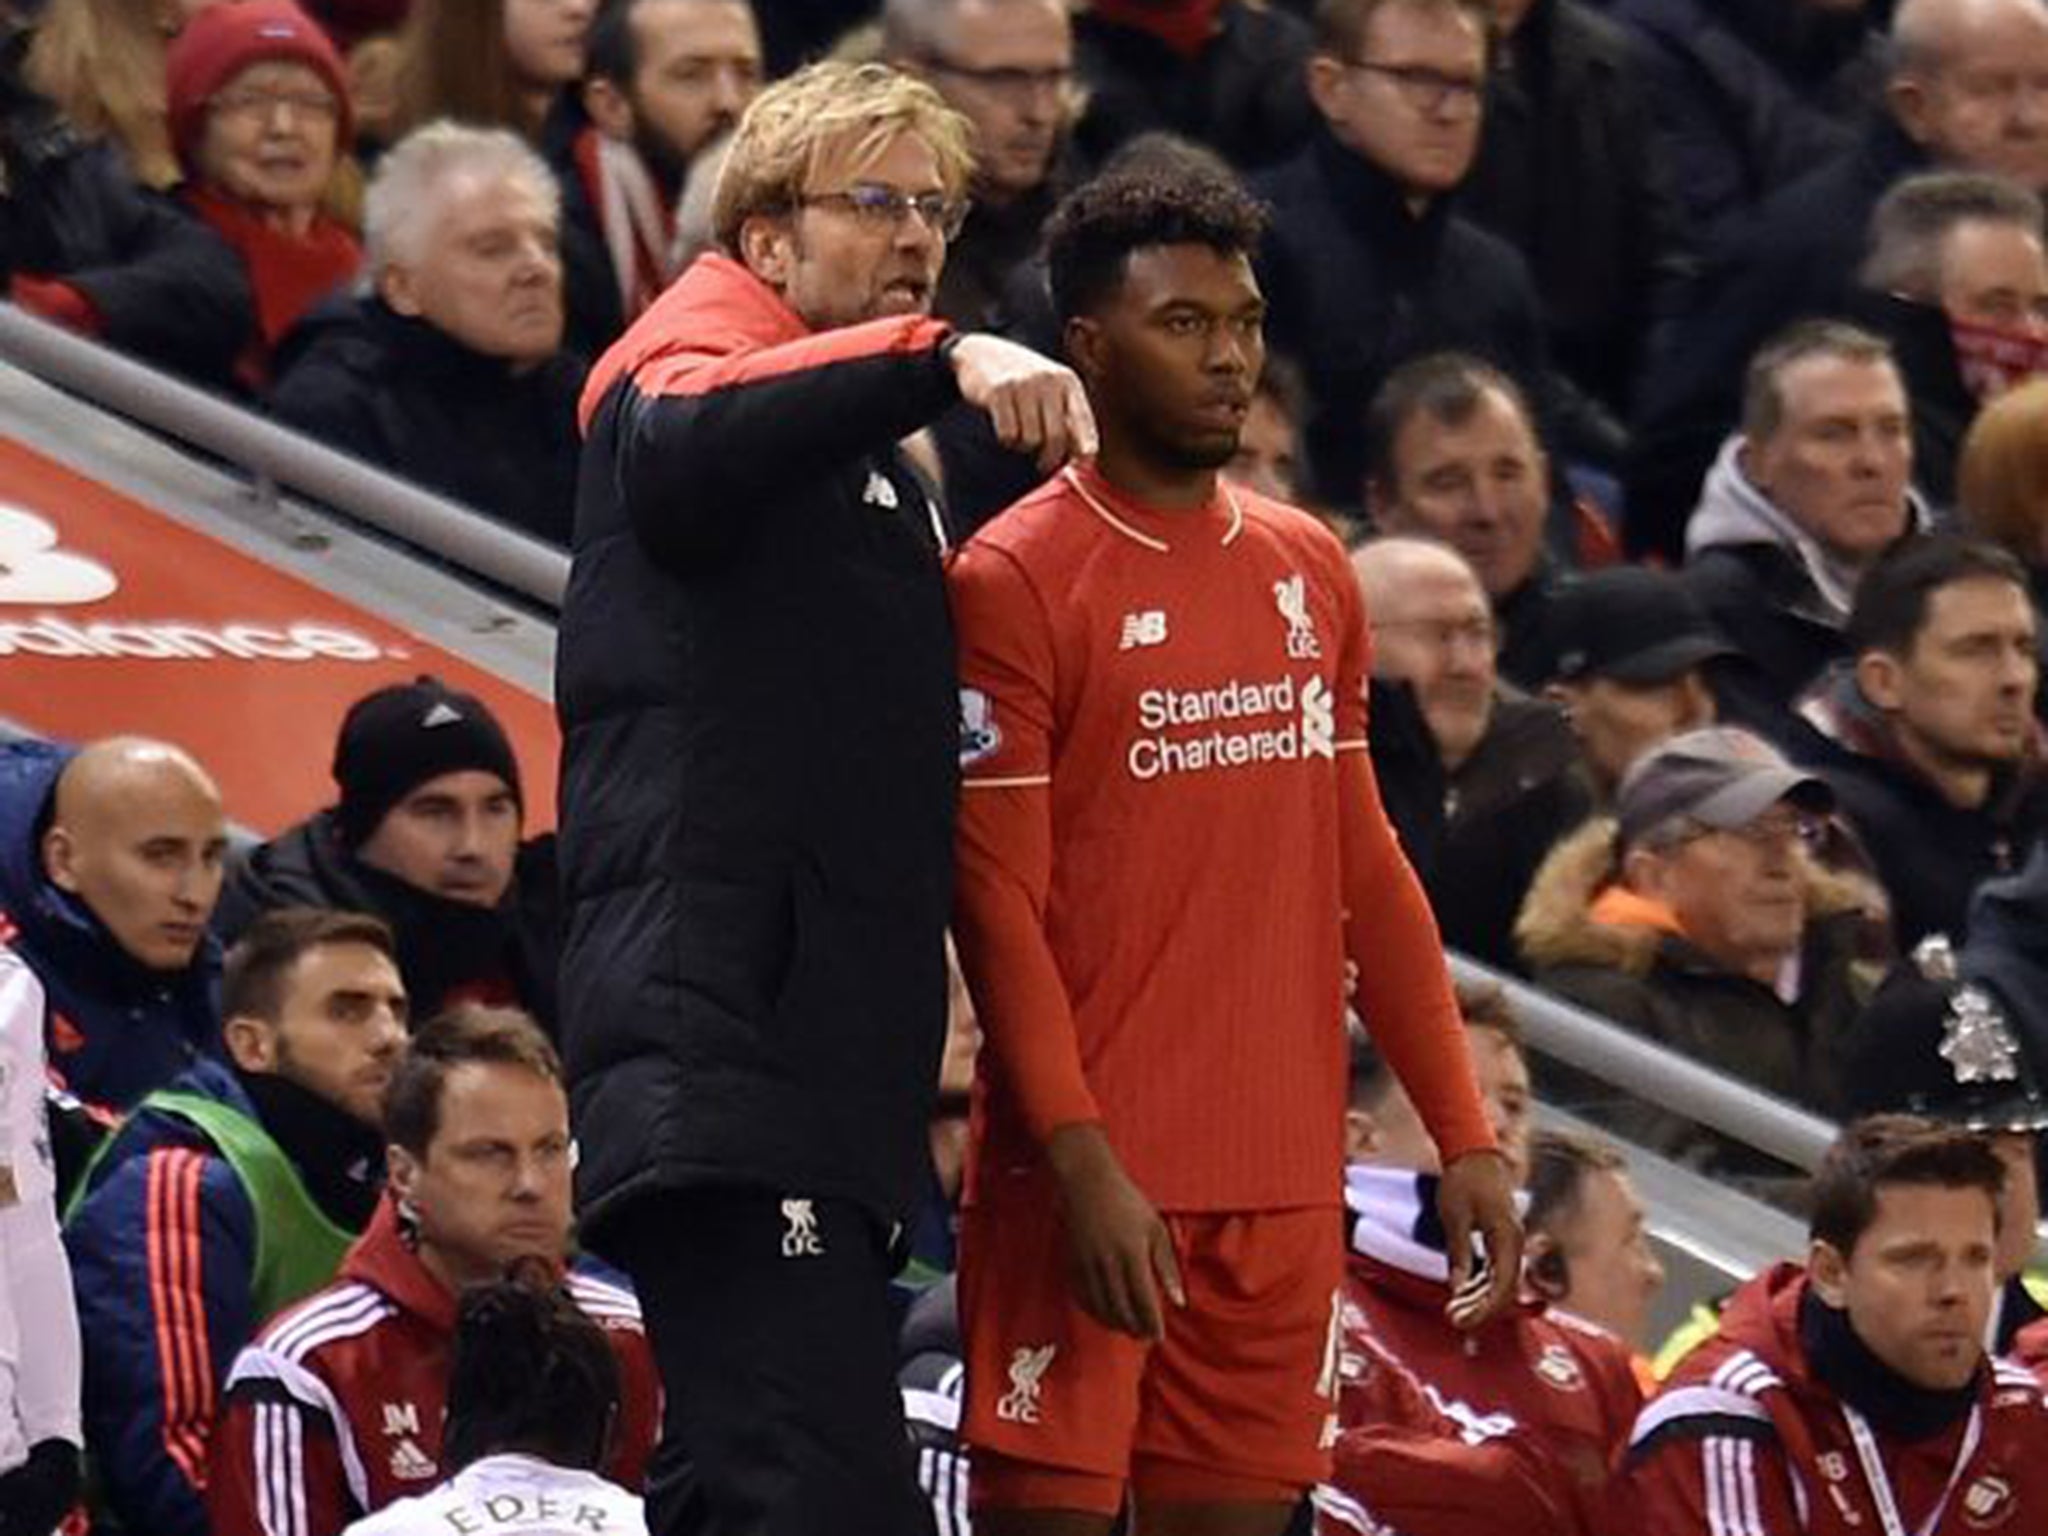 Jürgen Klopp has been outspoken about Daniel Sturridge’s injury problems but the forward is fit to play some part